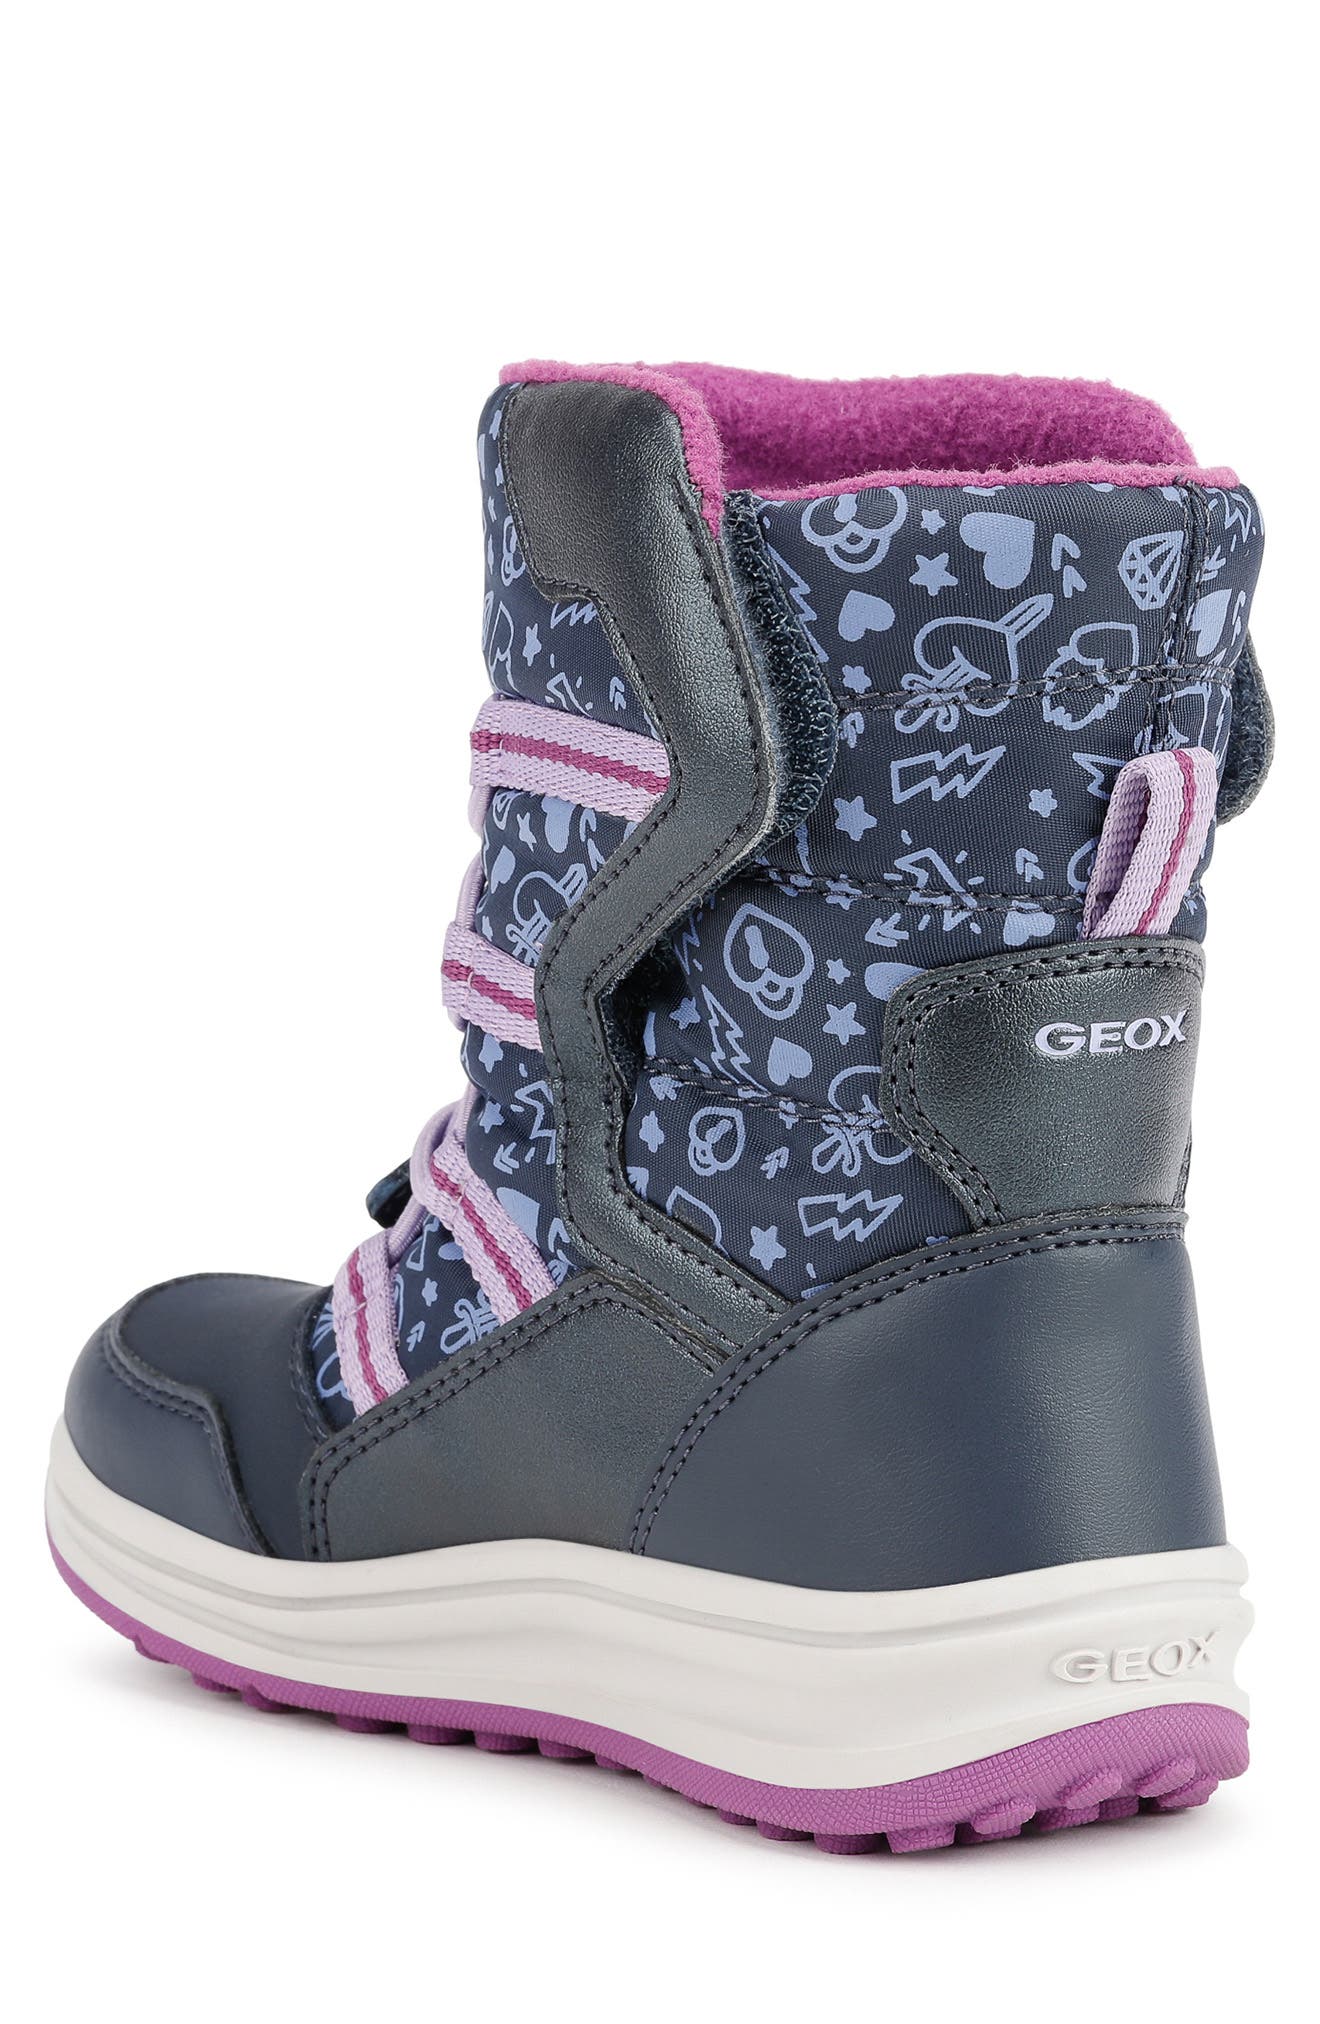 Geox Girls Roby Warm Lined T Boots LACE Grey/Fuch